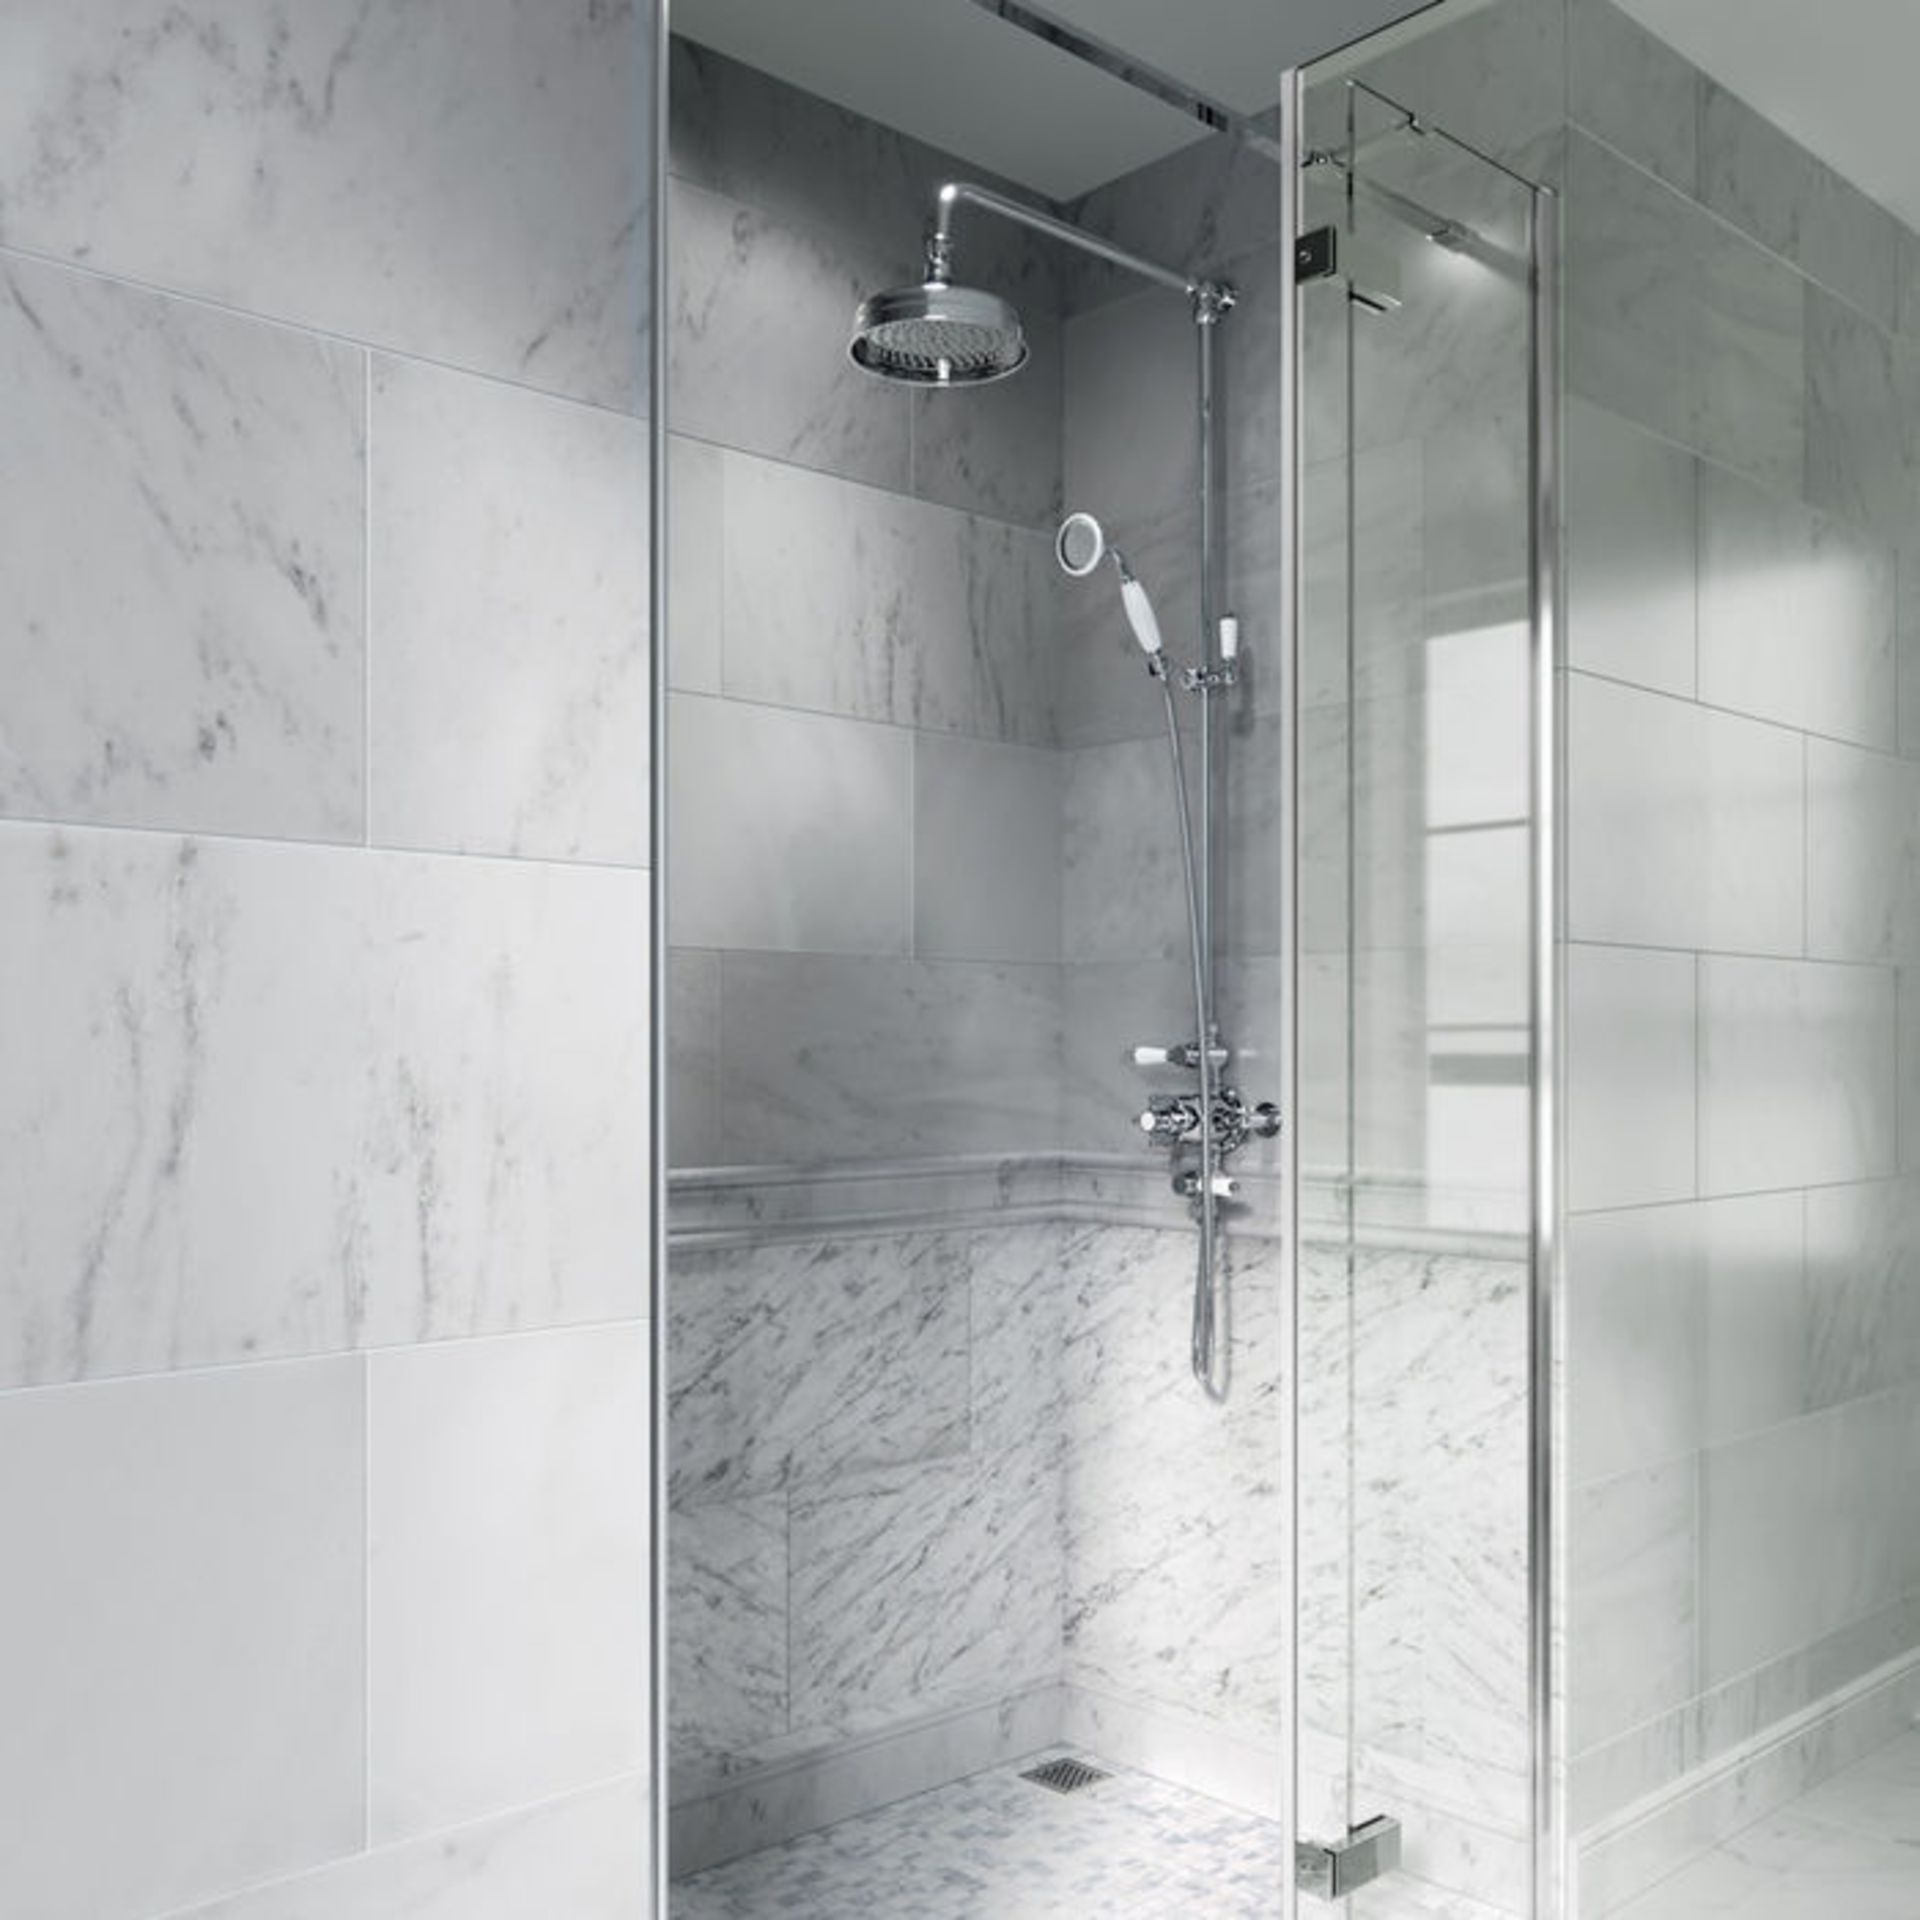 (H181) Traditional Exposed Shower Kit & Medium Head. RRP £249.99. Traditional exposed valve - Image 3 of 7